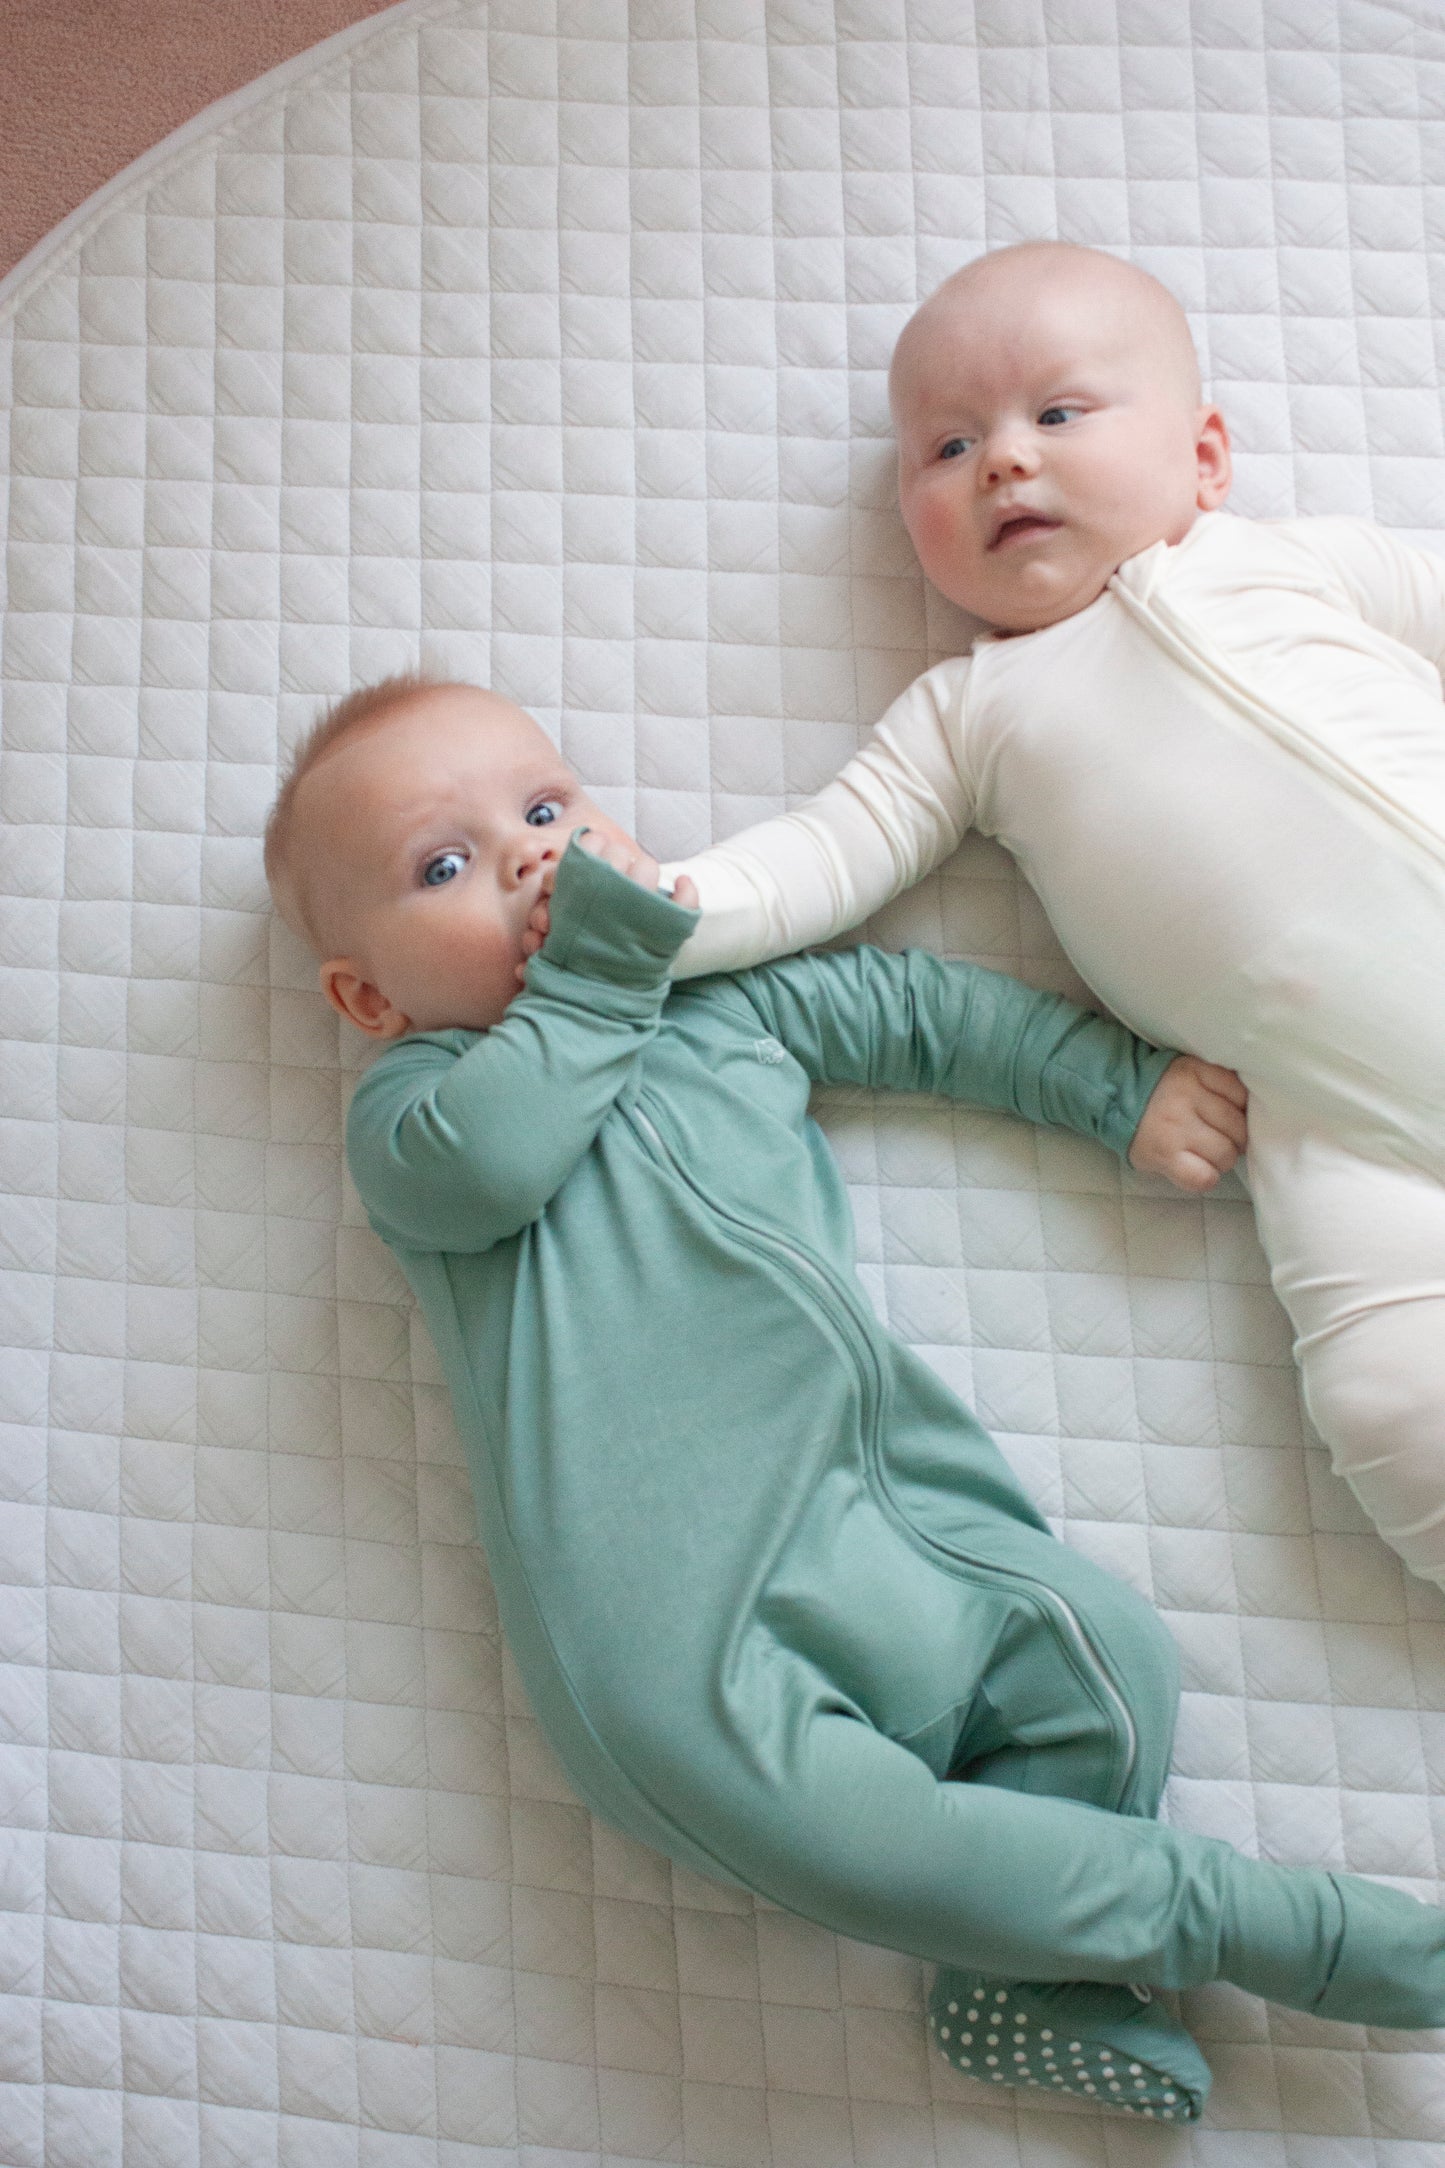 Baby gift set of 3 bamboo zipper sleepsuits -Green/White/Blue